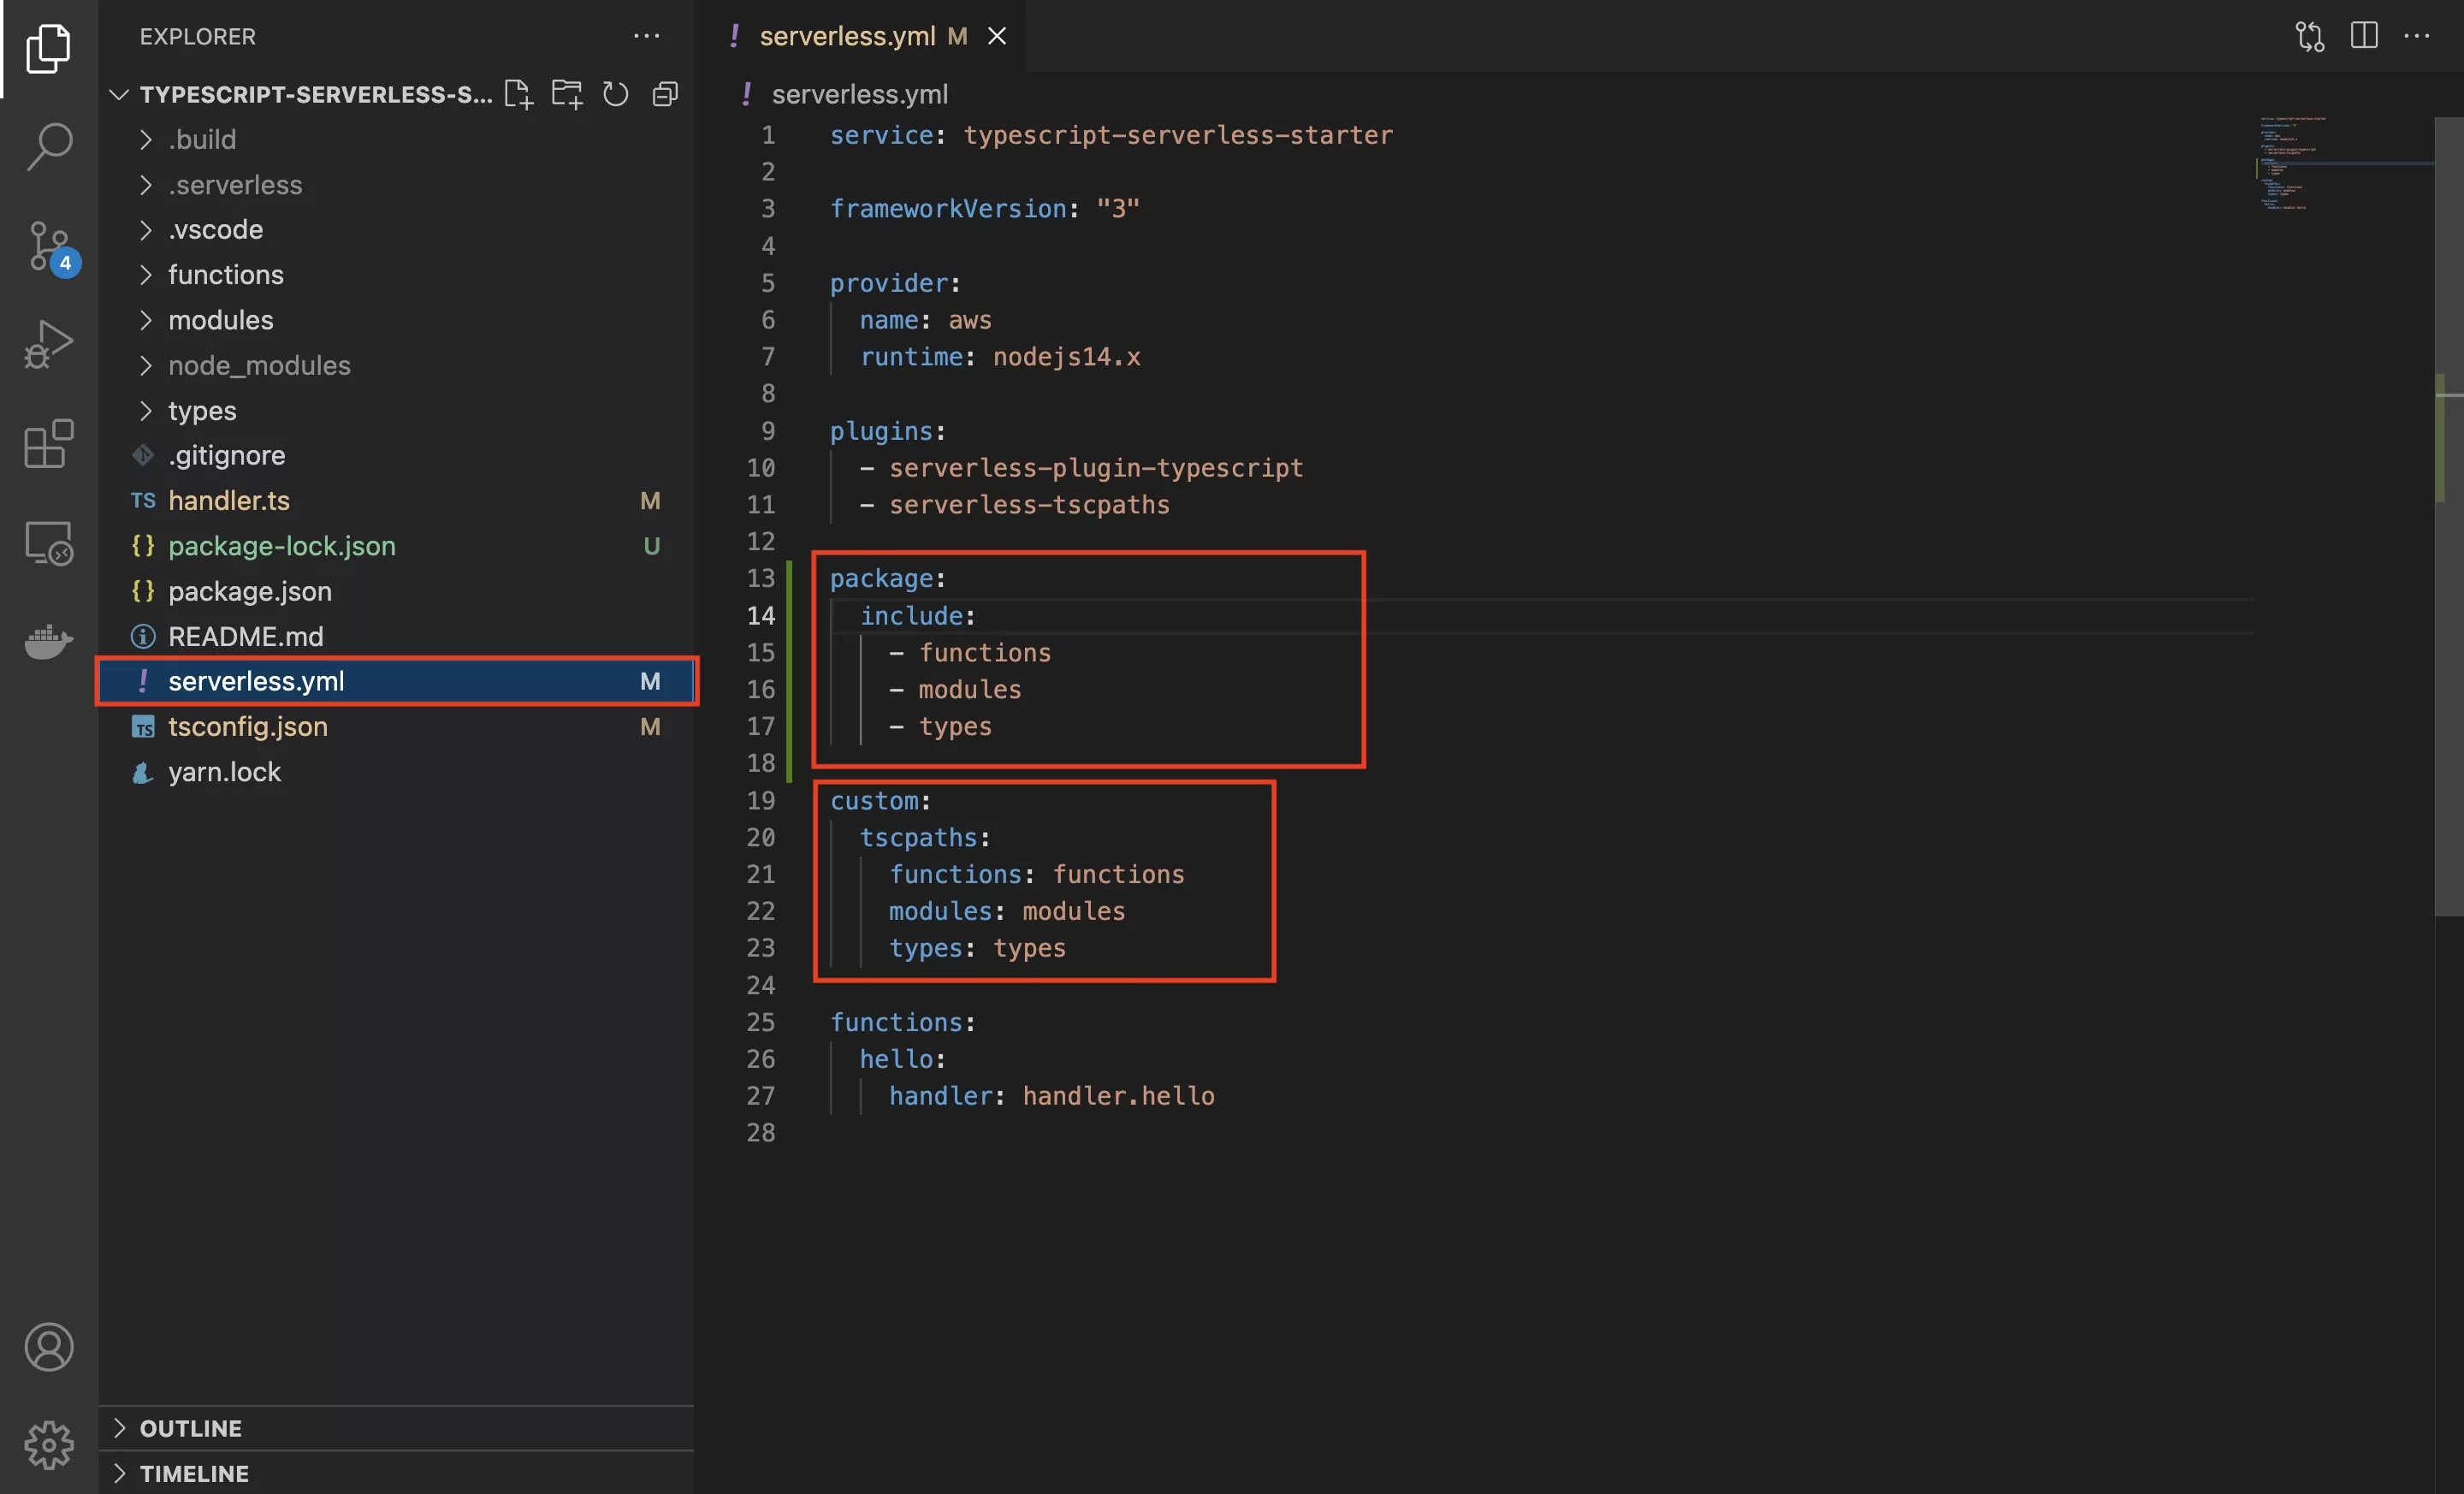 A screenshot of VSCode showing the updated serverless.yml file with the custom paths.